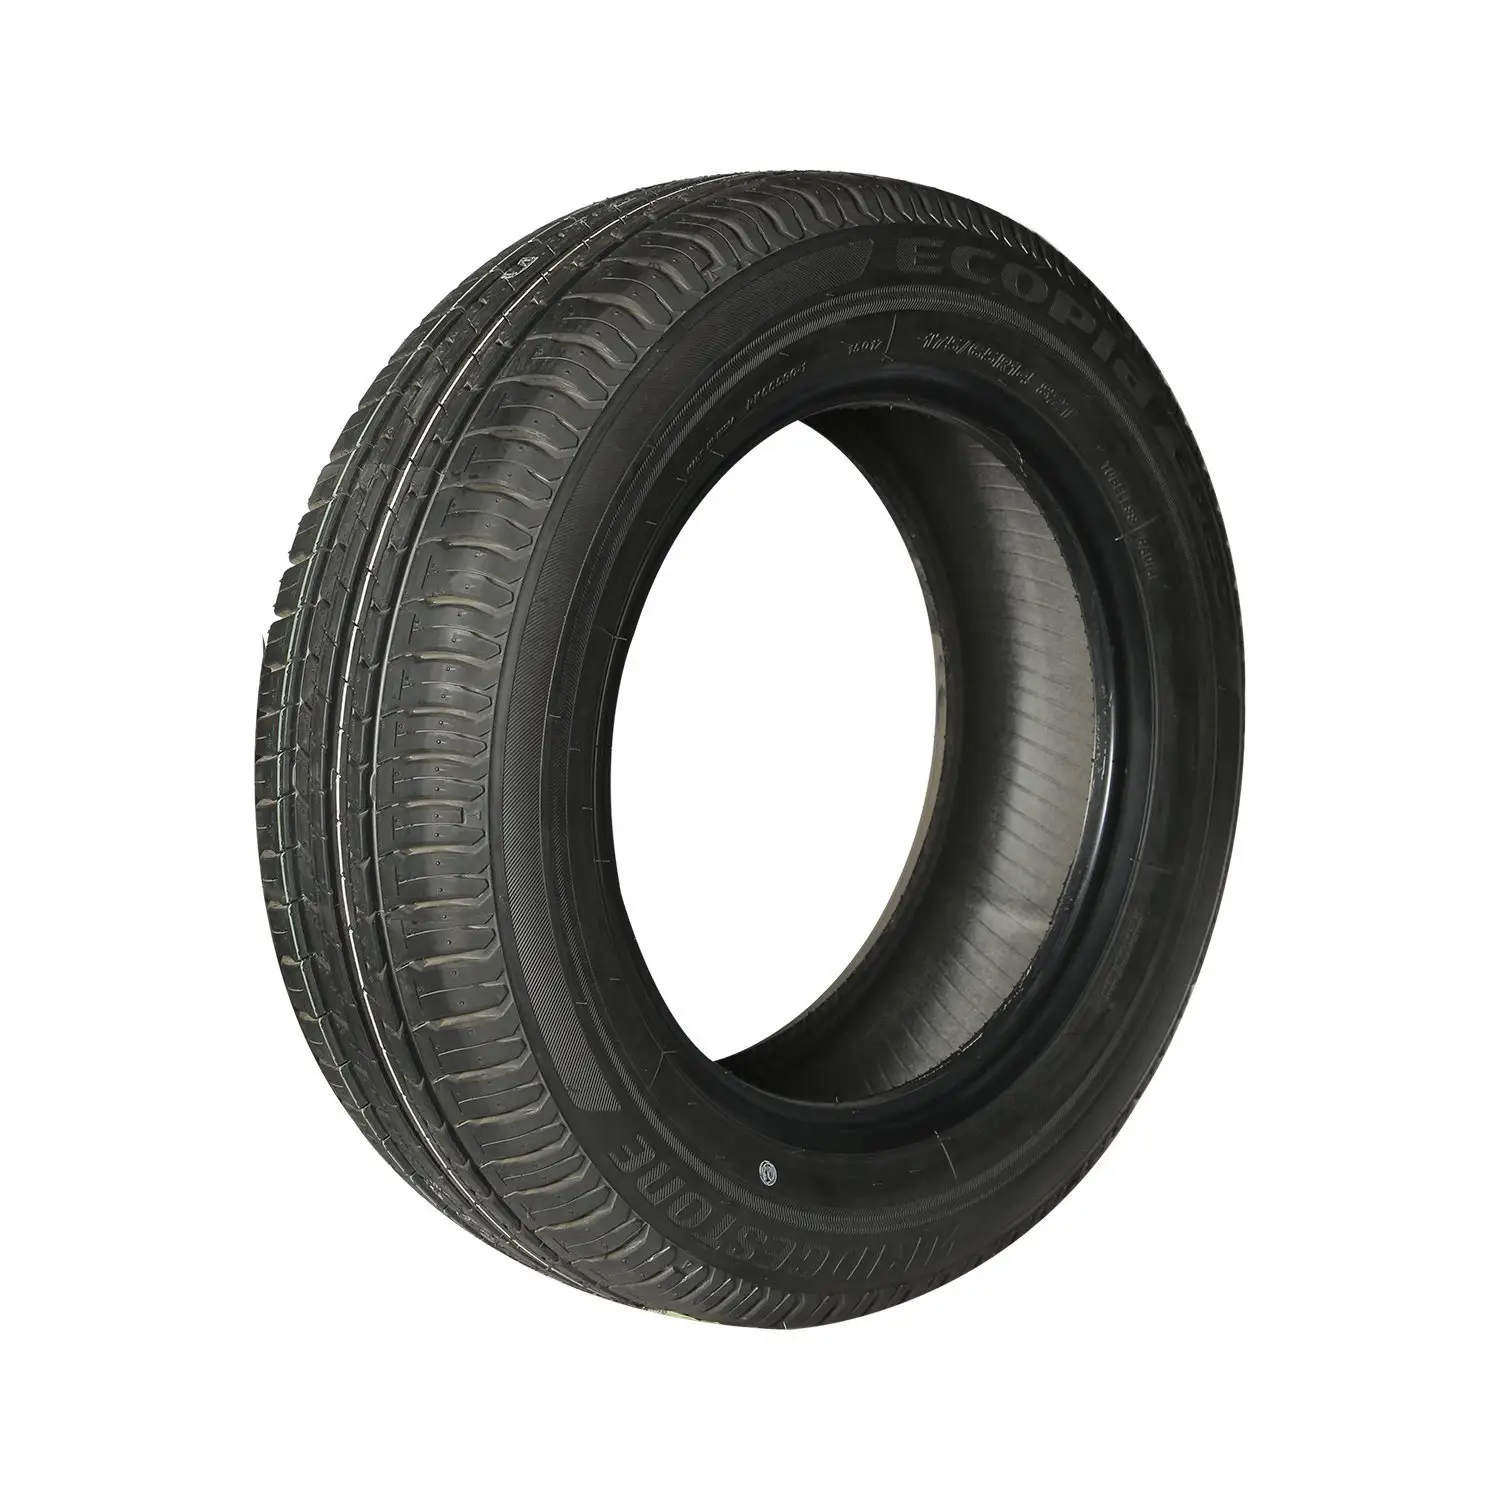 Best Quality and Cheap Price Used Truck Tyres Size 315/80R22.5 RLB450 RR202 Heavy duty radial truck tyres for Export